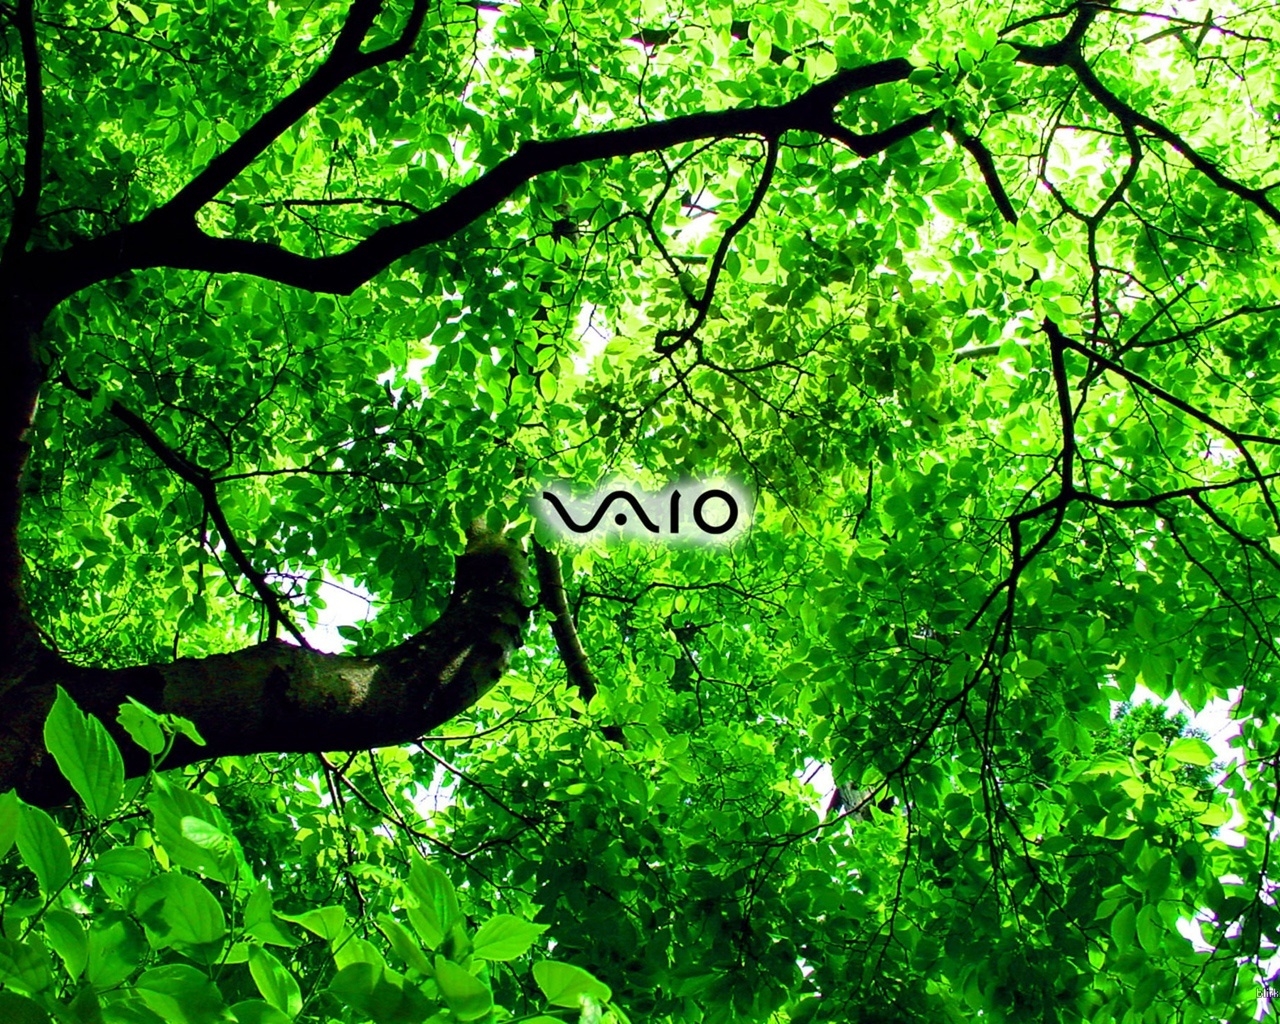 Sony Vaio green for 1280 x 1024 resolution